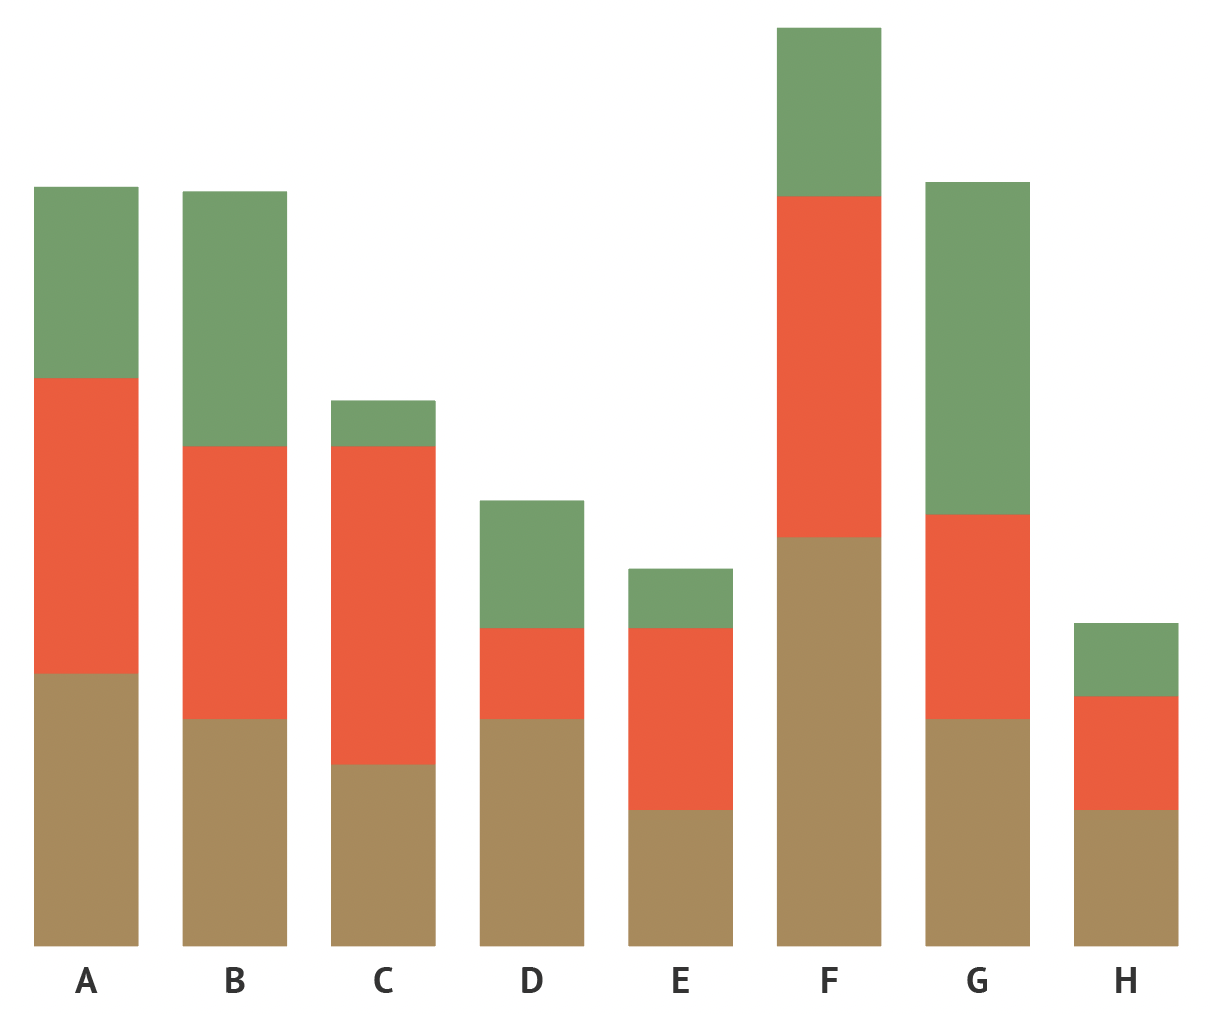 A stacked bar chart with 3 series, coloured in green, red and brown